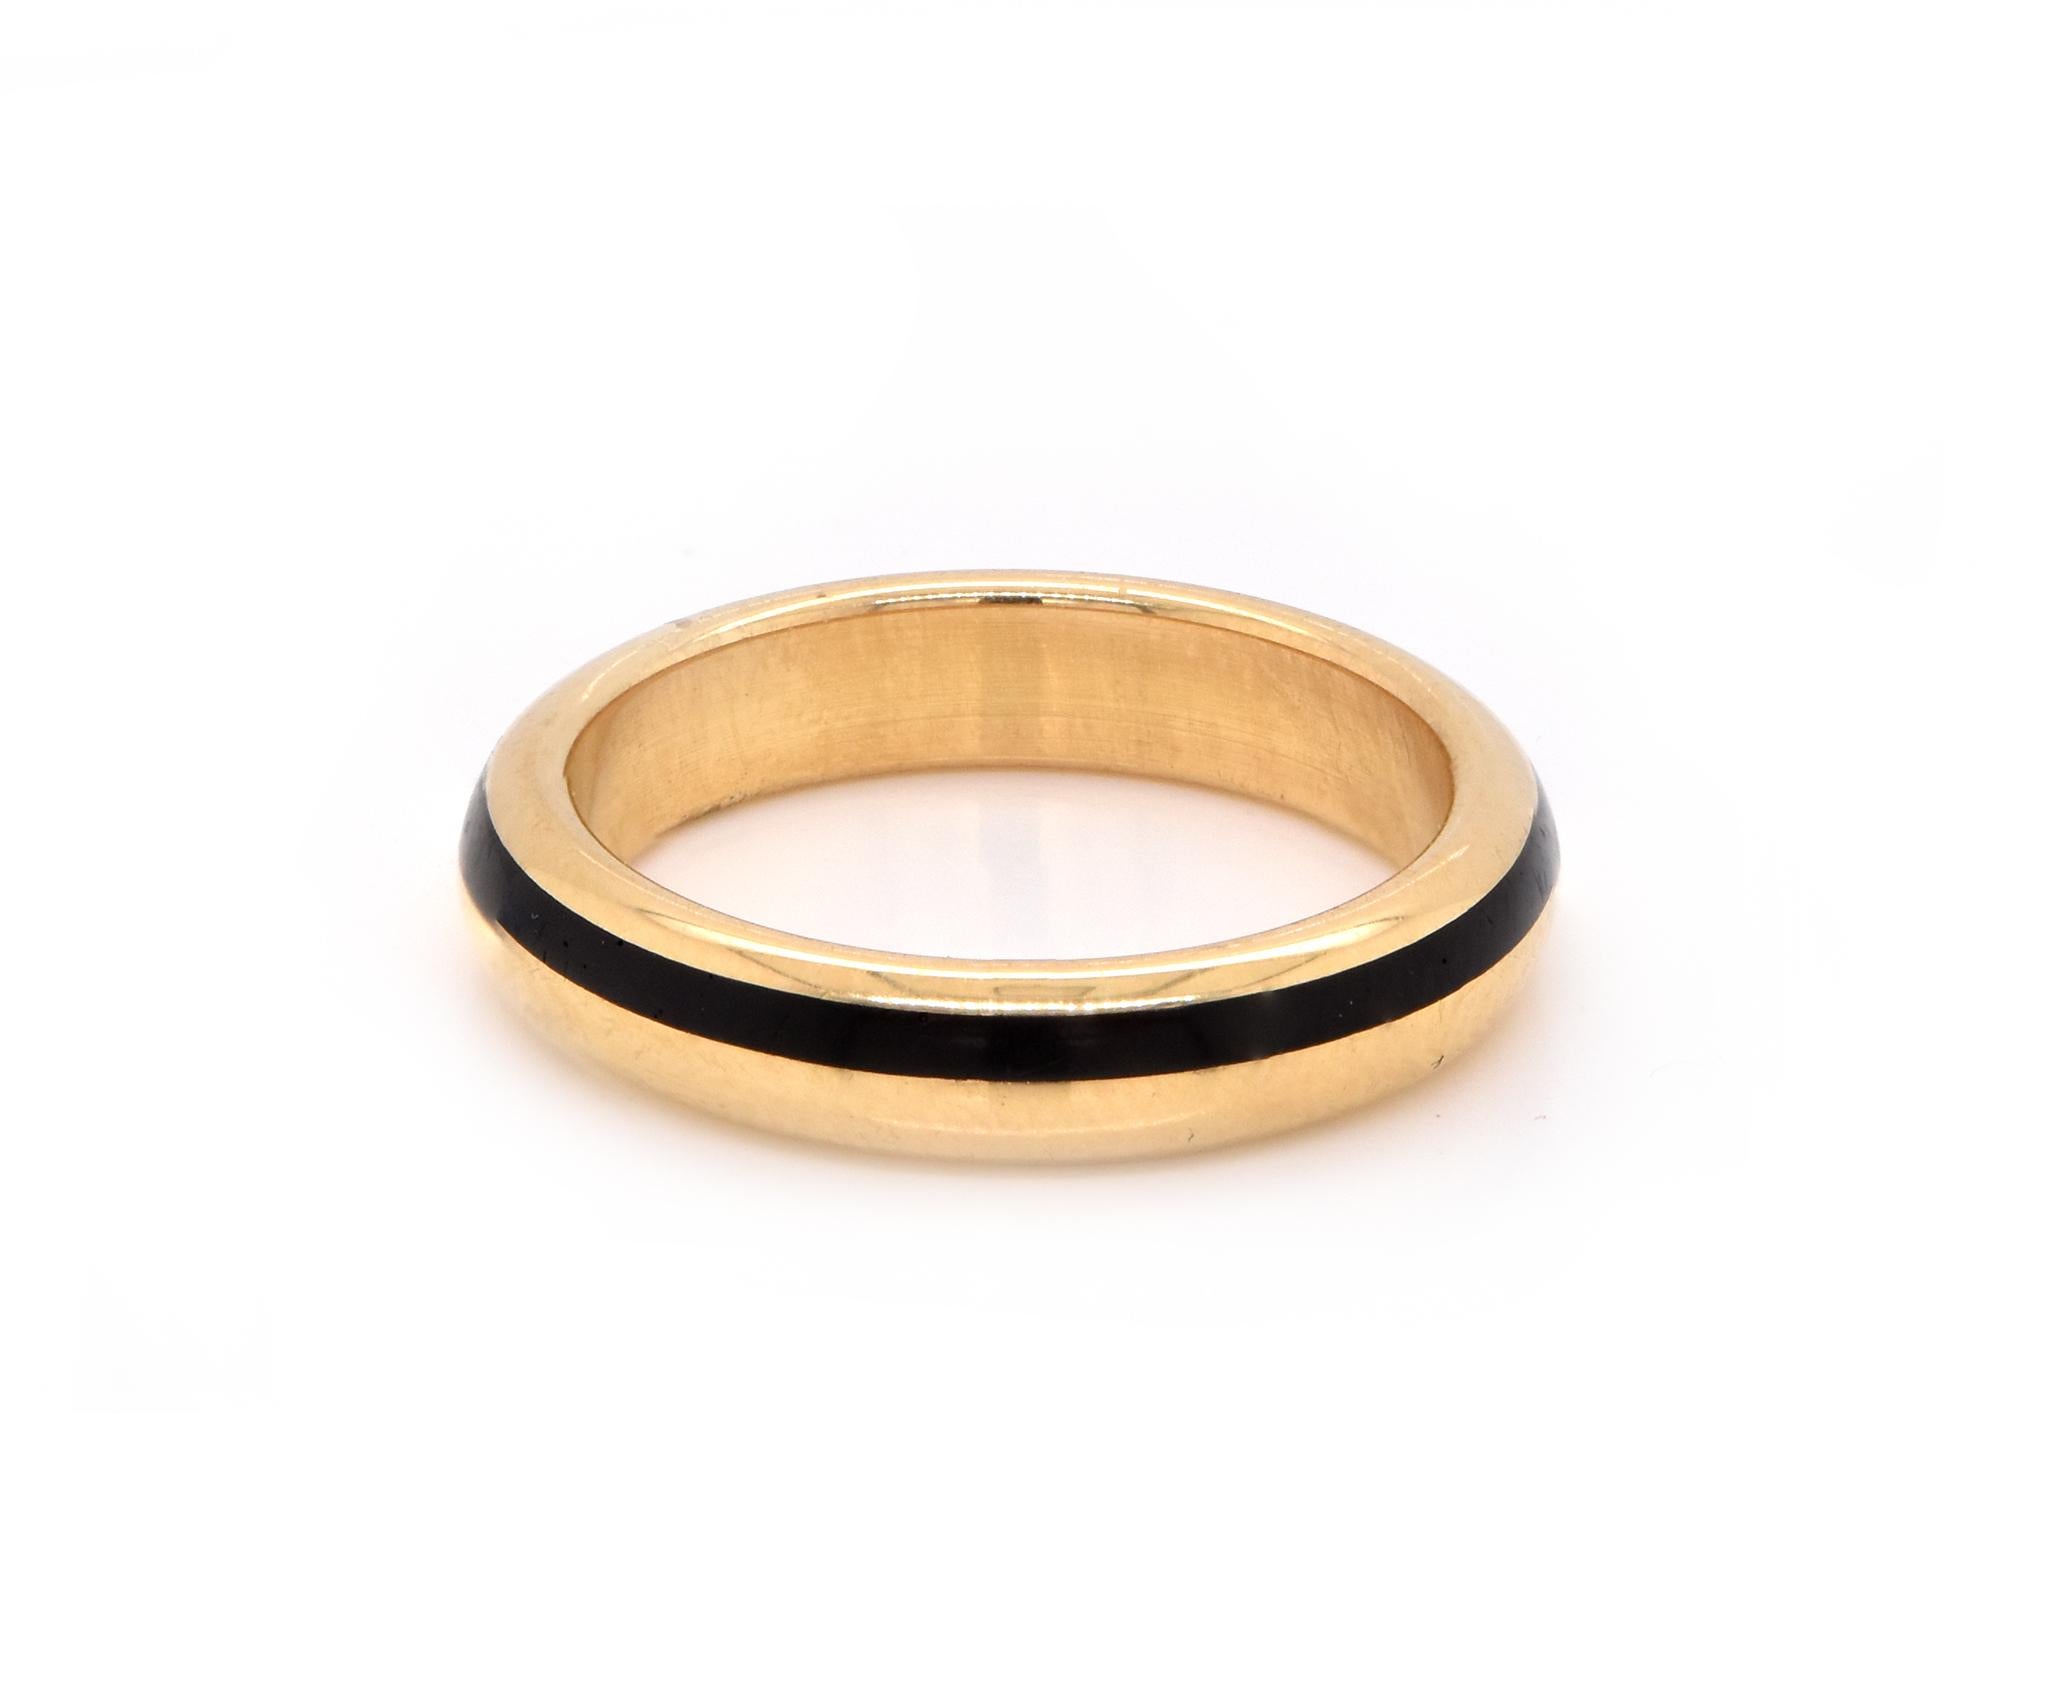 Designer: custom
Material: 18K yellow gold
Ring Size: 5 (please allow up to 2 additional business days for sizing requests)
Dimensions: ring top measures 3.82mm
Weight:  4.99 grams
